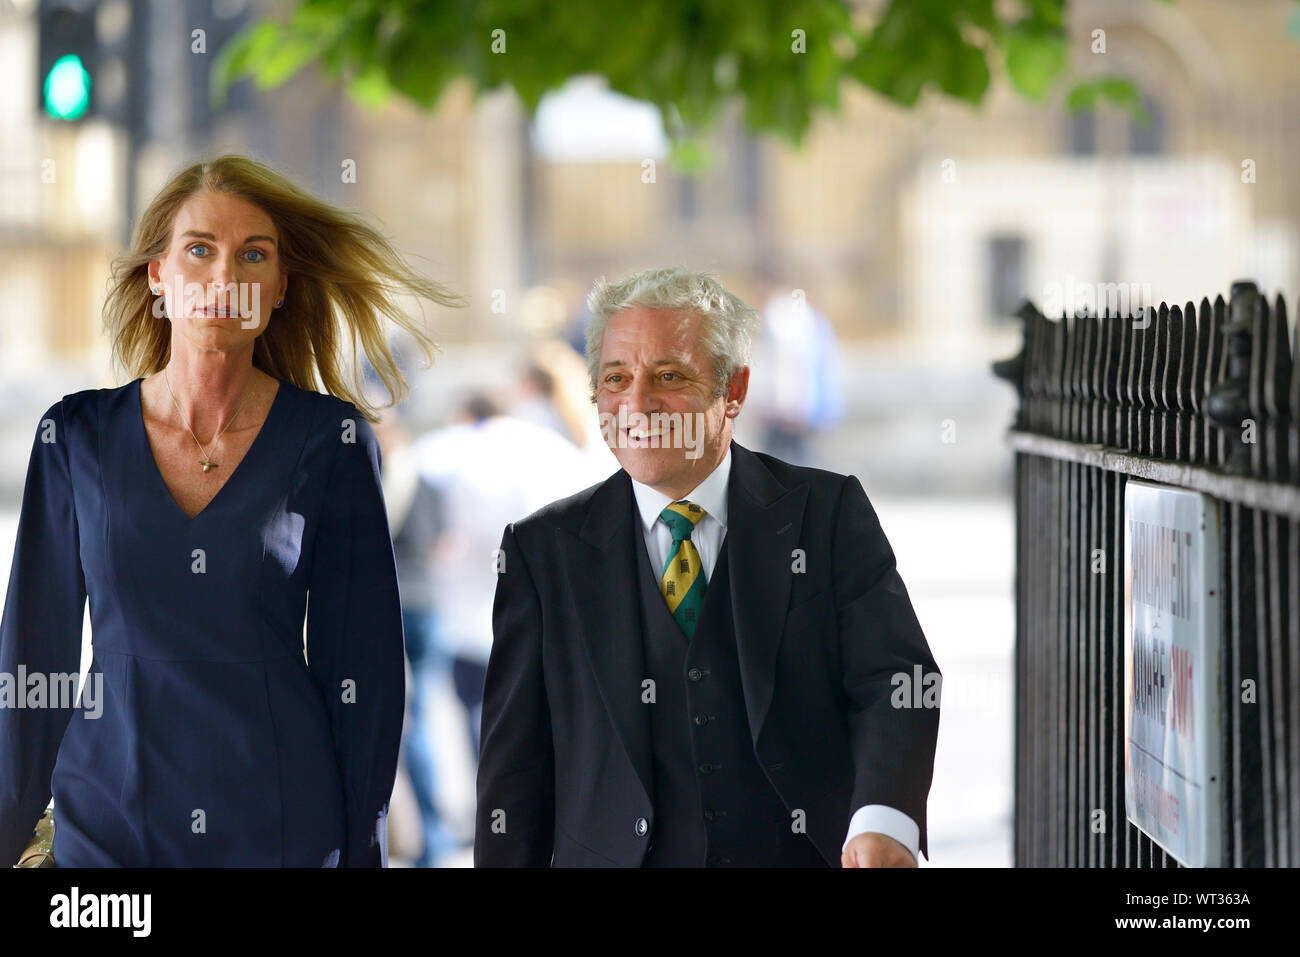 John Bercow MP - Speaker of the House of Commons - walking with his wife Sally in Westminster, 10th September 2019 Stock Photo